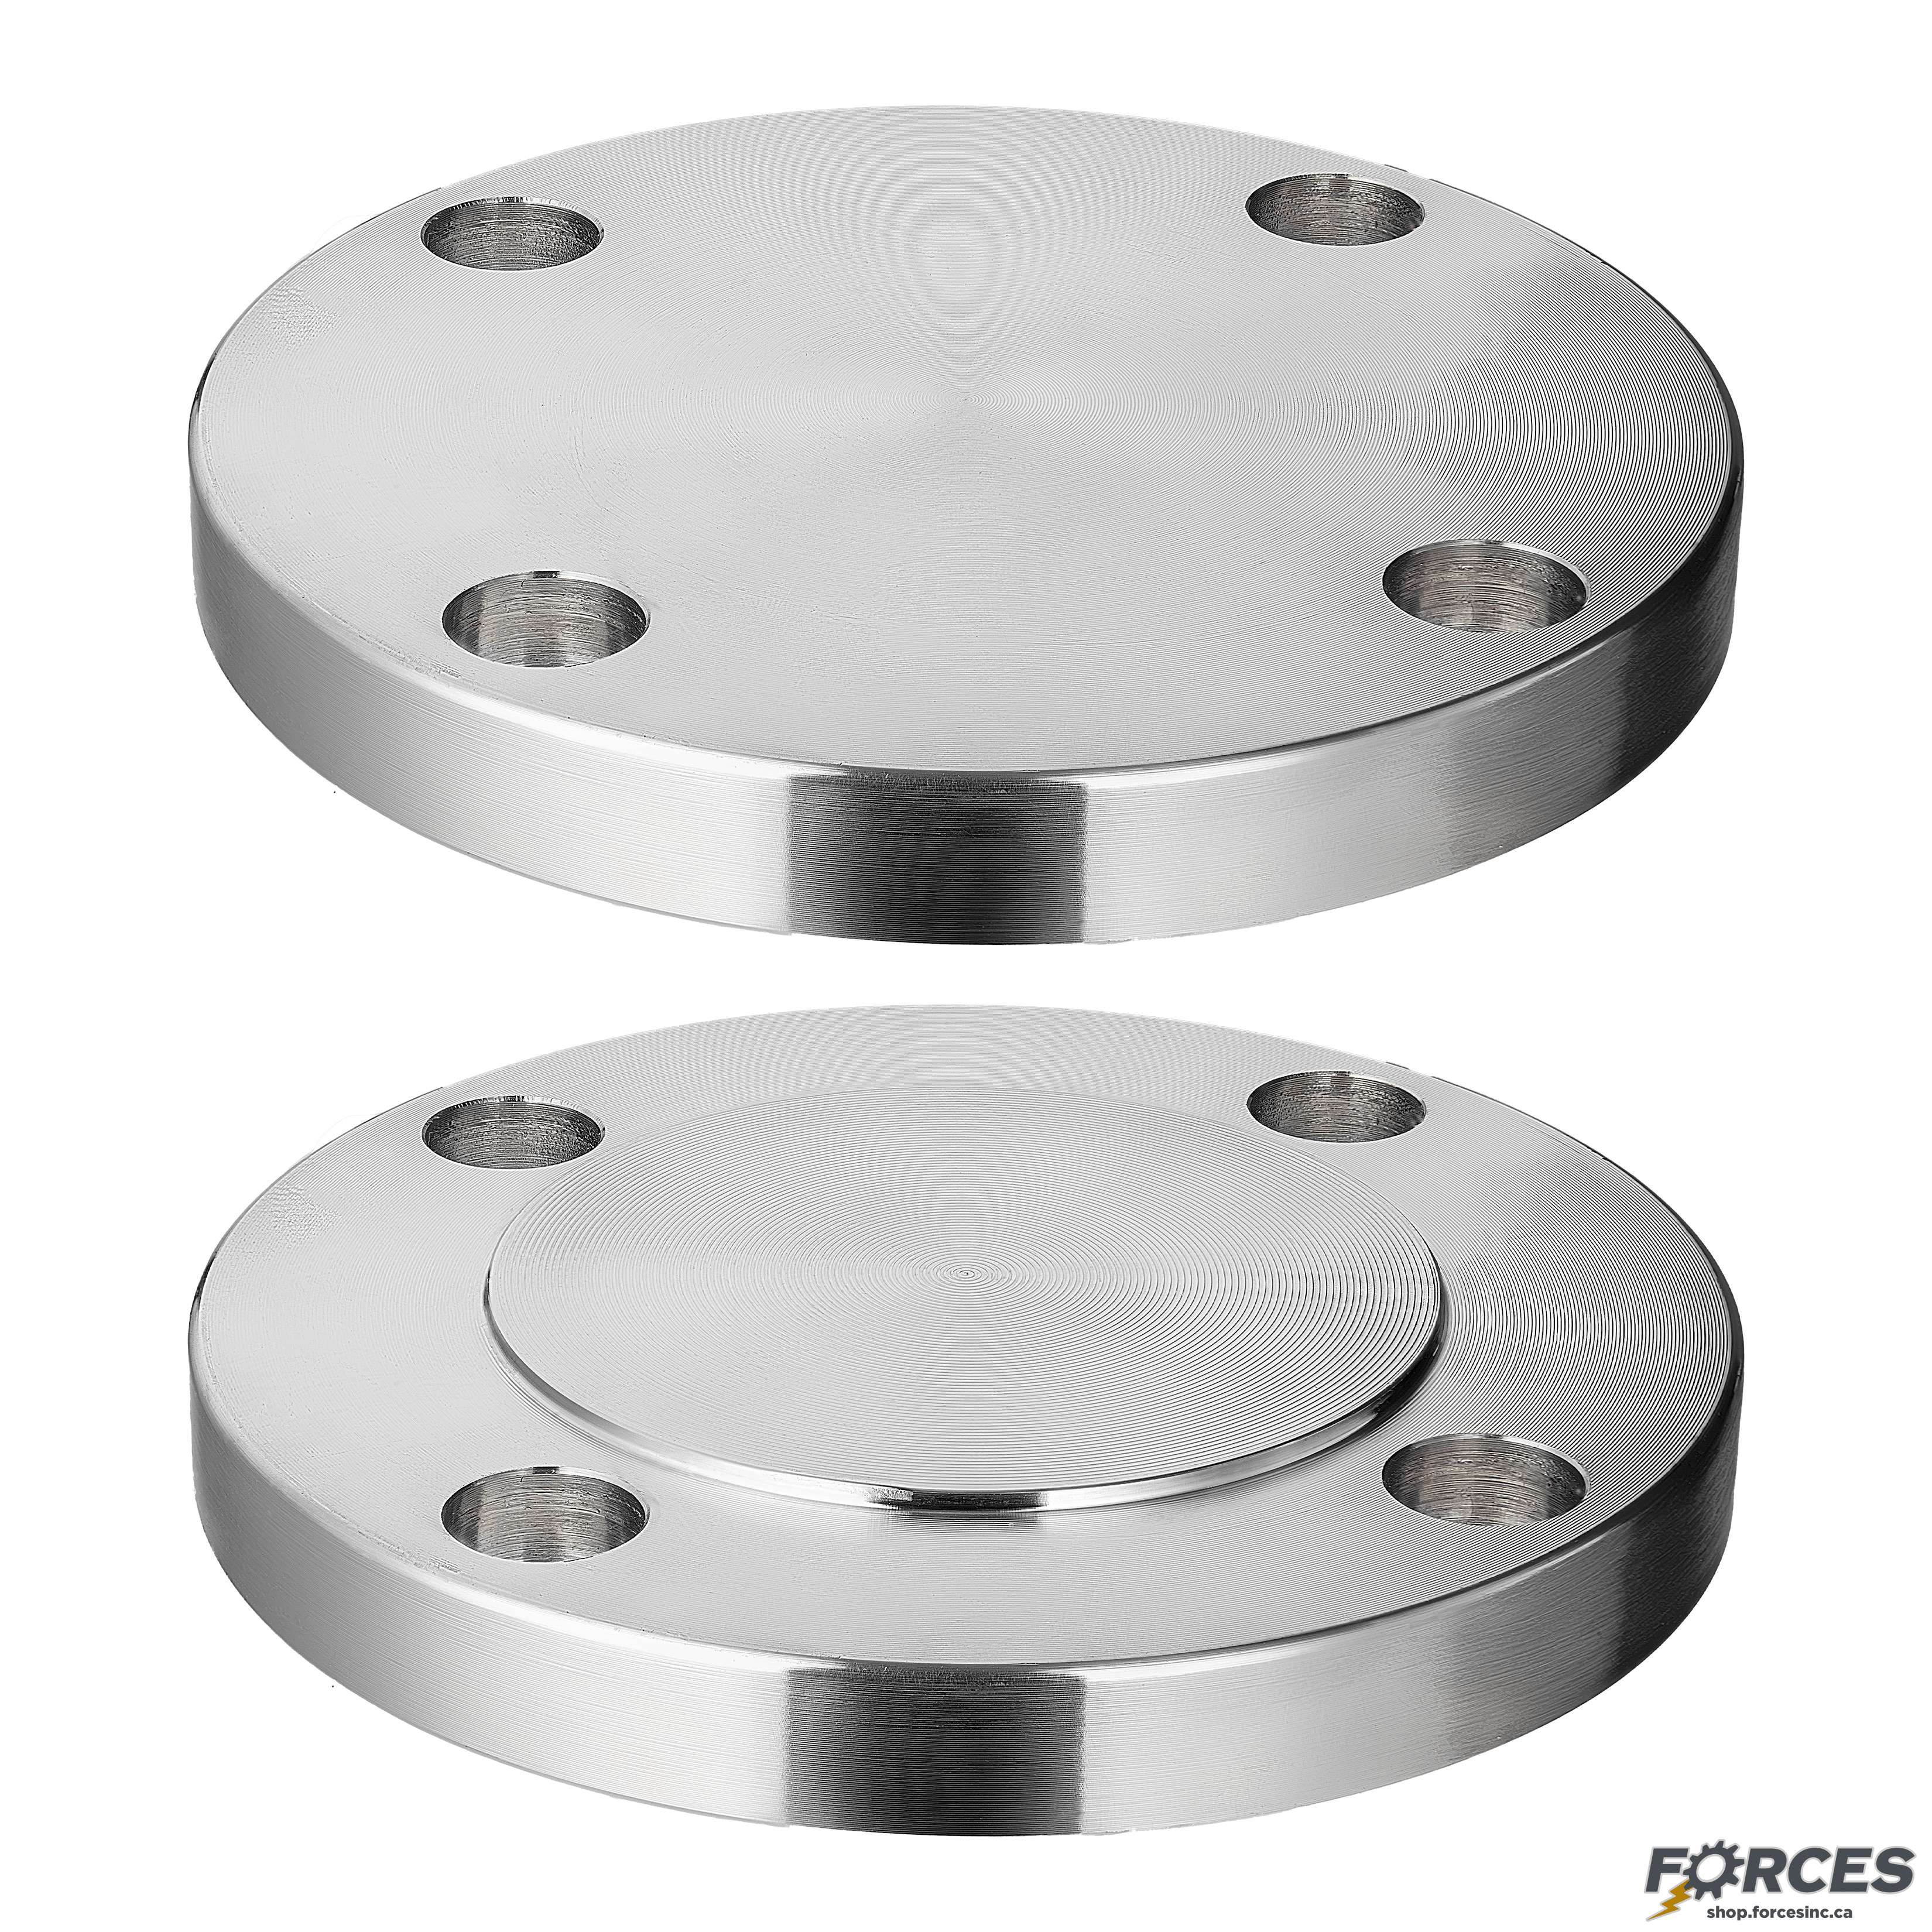 1/2" Blind Flange Class #150 - Stainless Steel 316 - Forces Inc